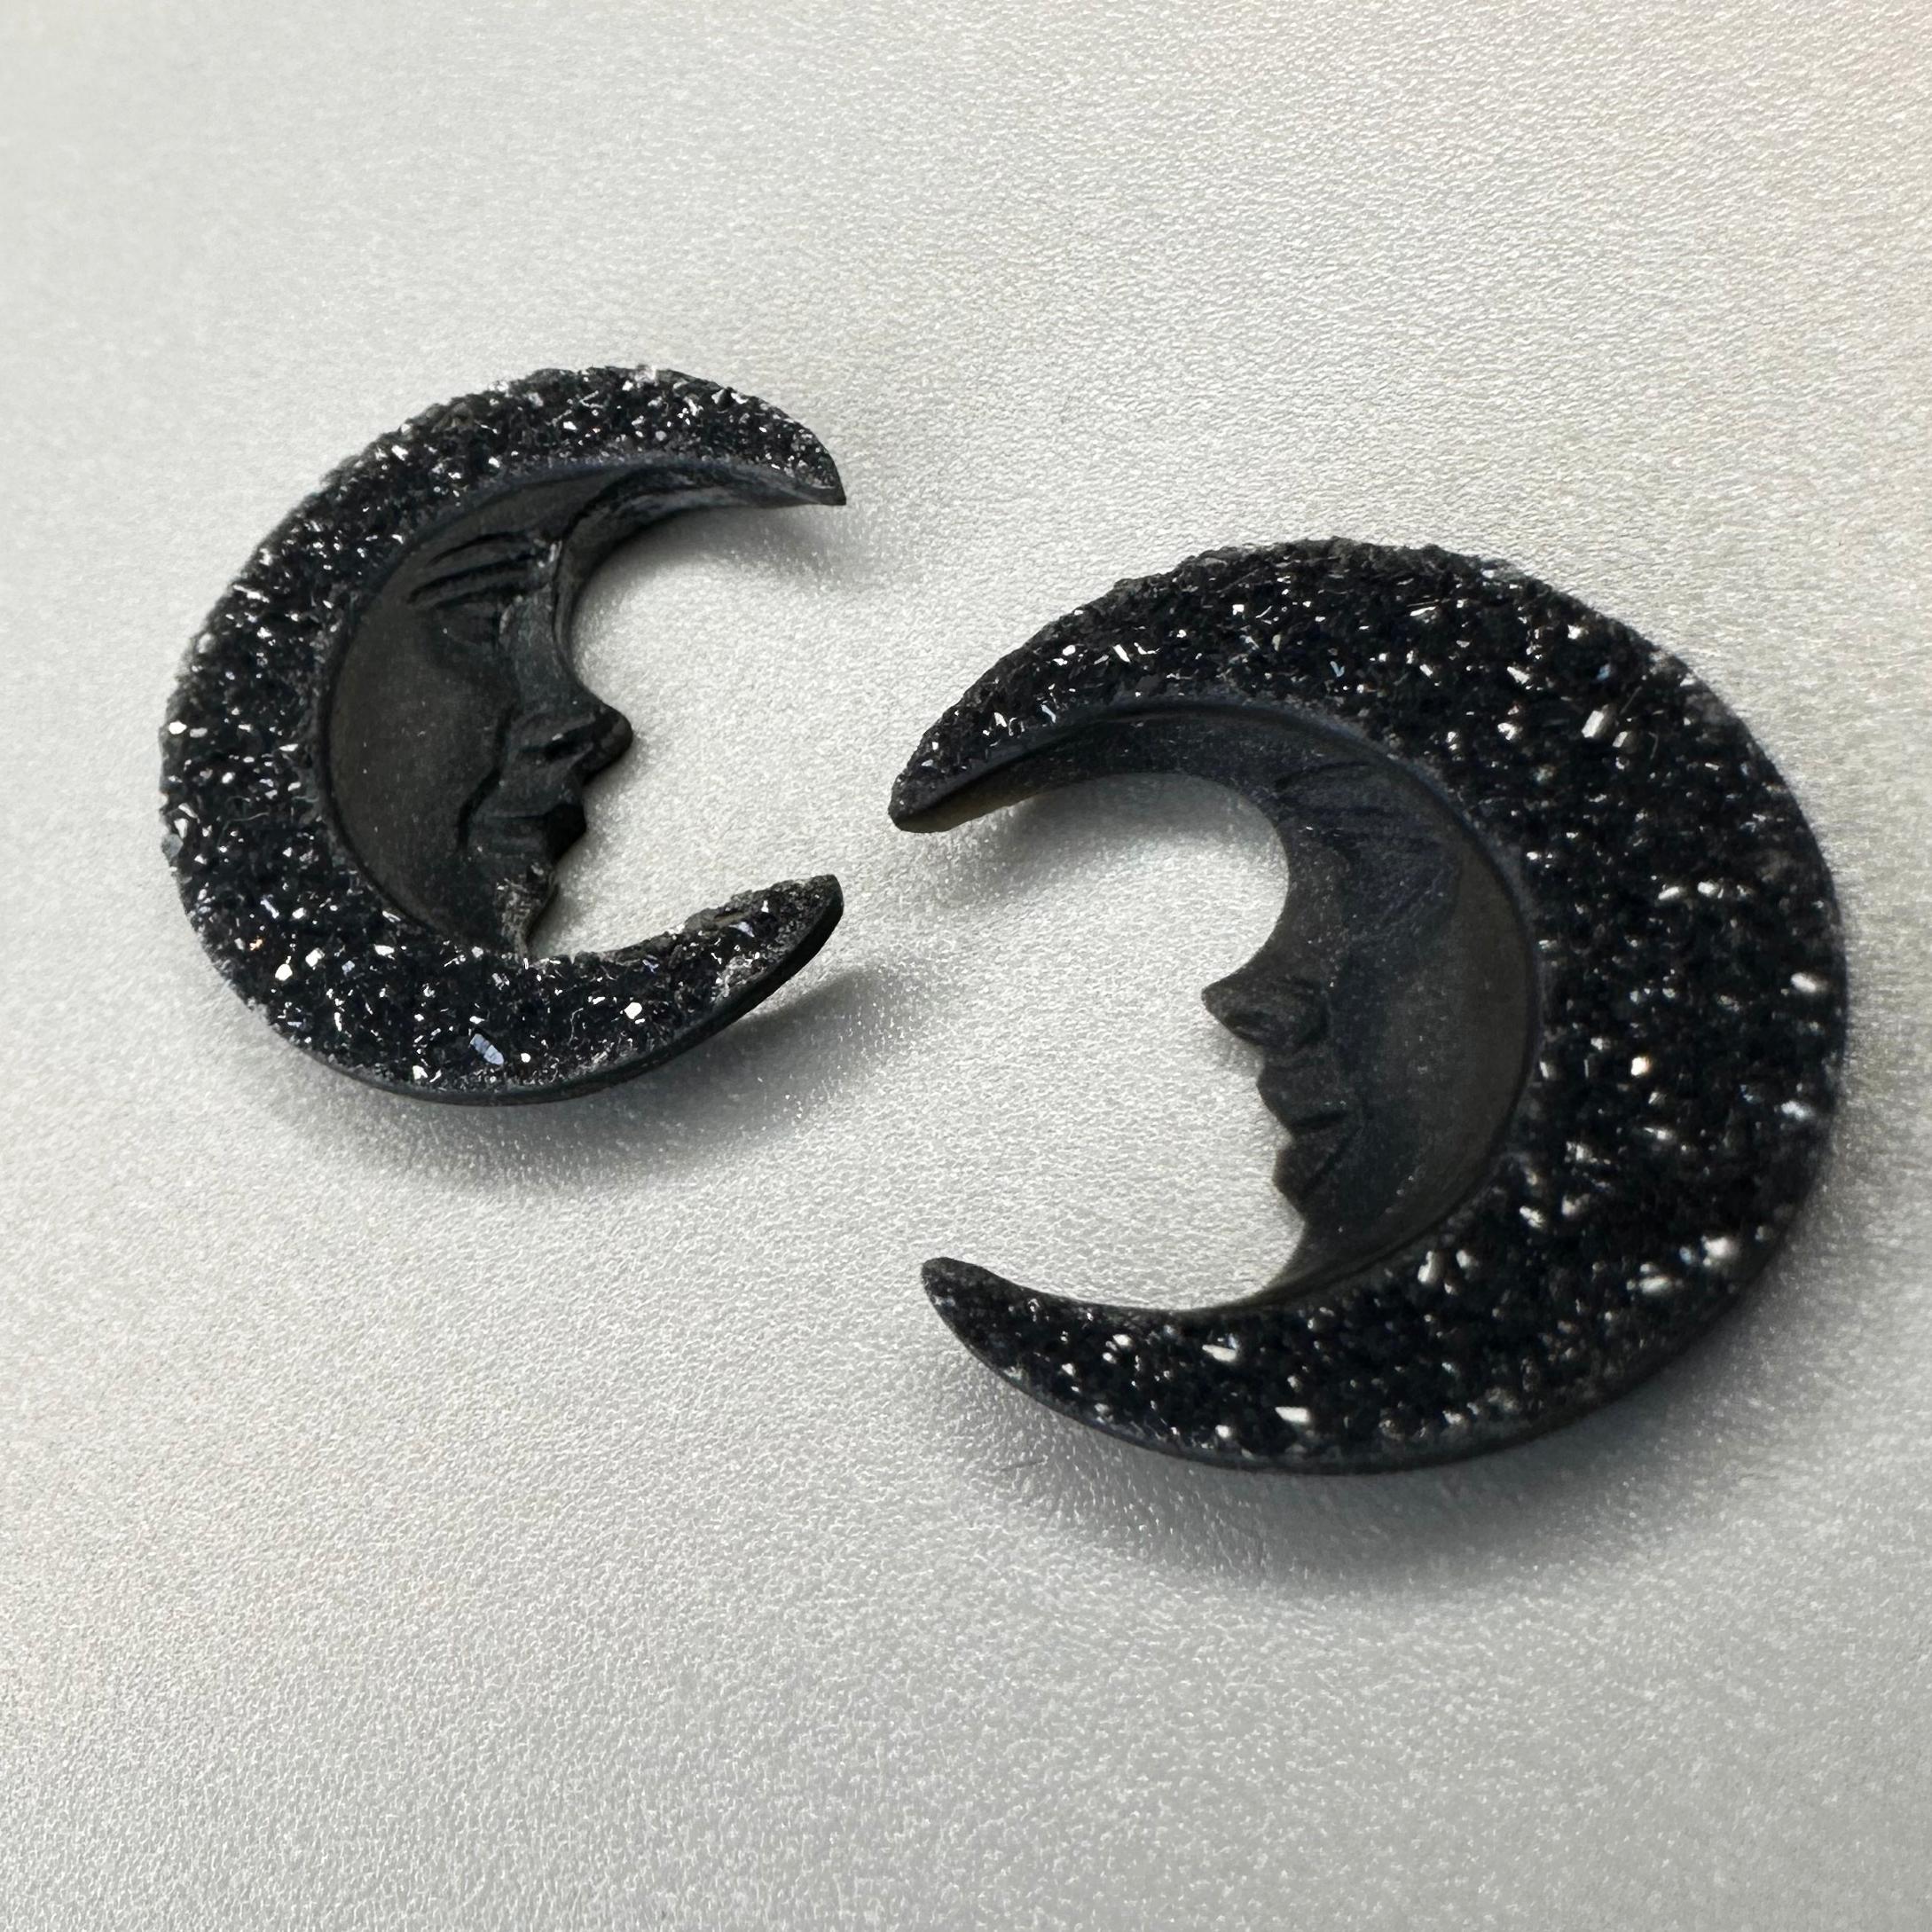 Step into the moon's shadow and catch a glimpse of their complementary faces haloed in sparkling stars and immortalized in this beautifully carved gem set. 

This stunning pair of black druzy agate moon faces were hand crafted by the master carvers